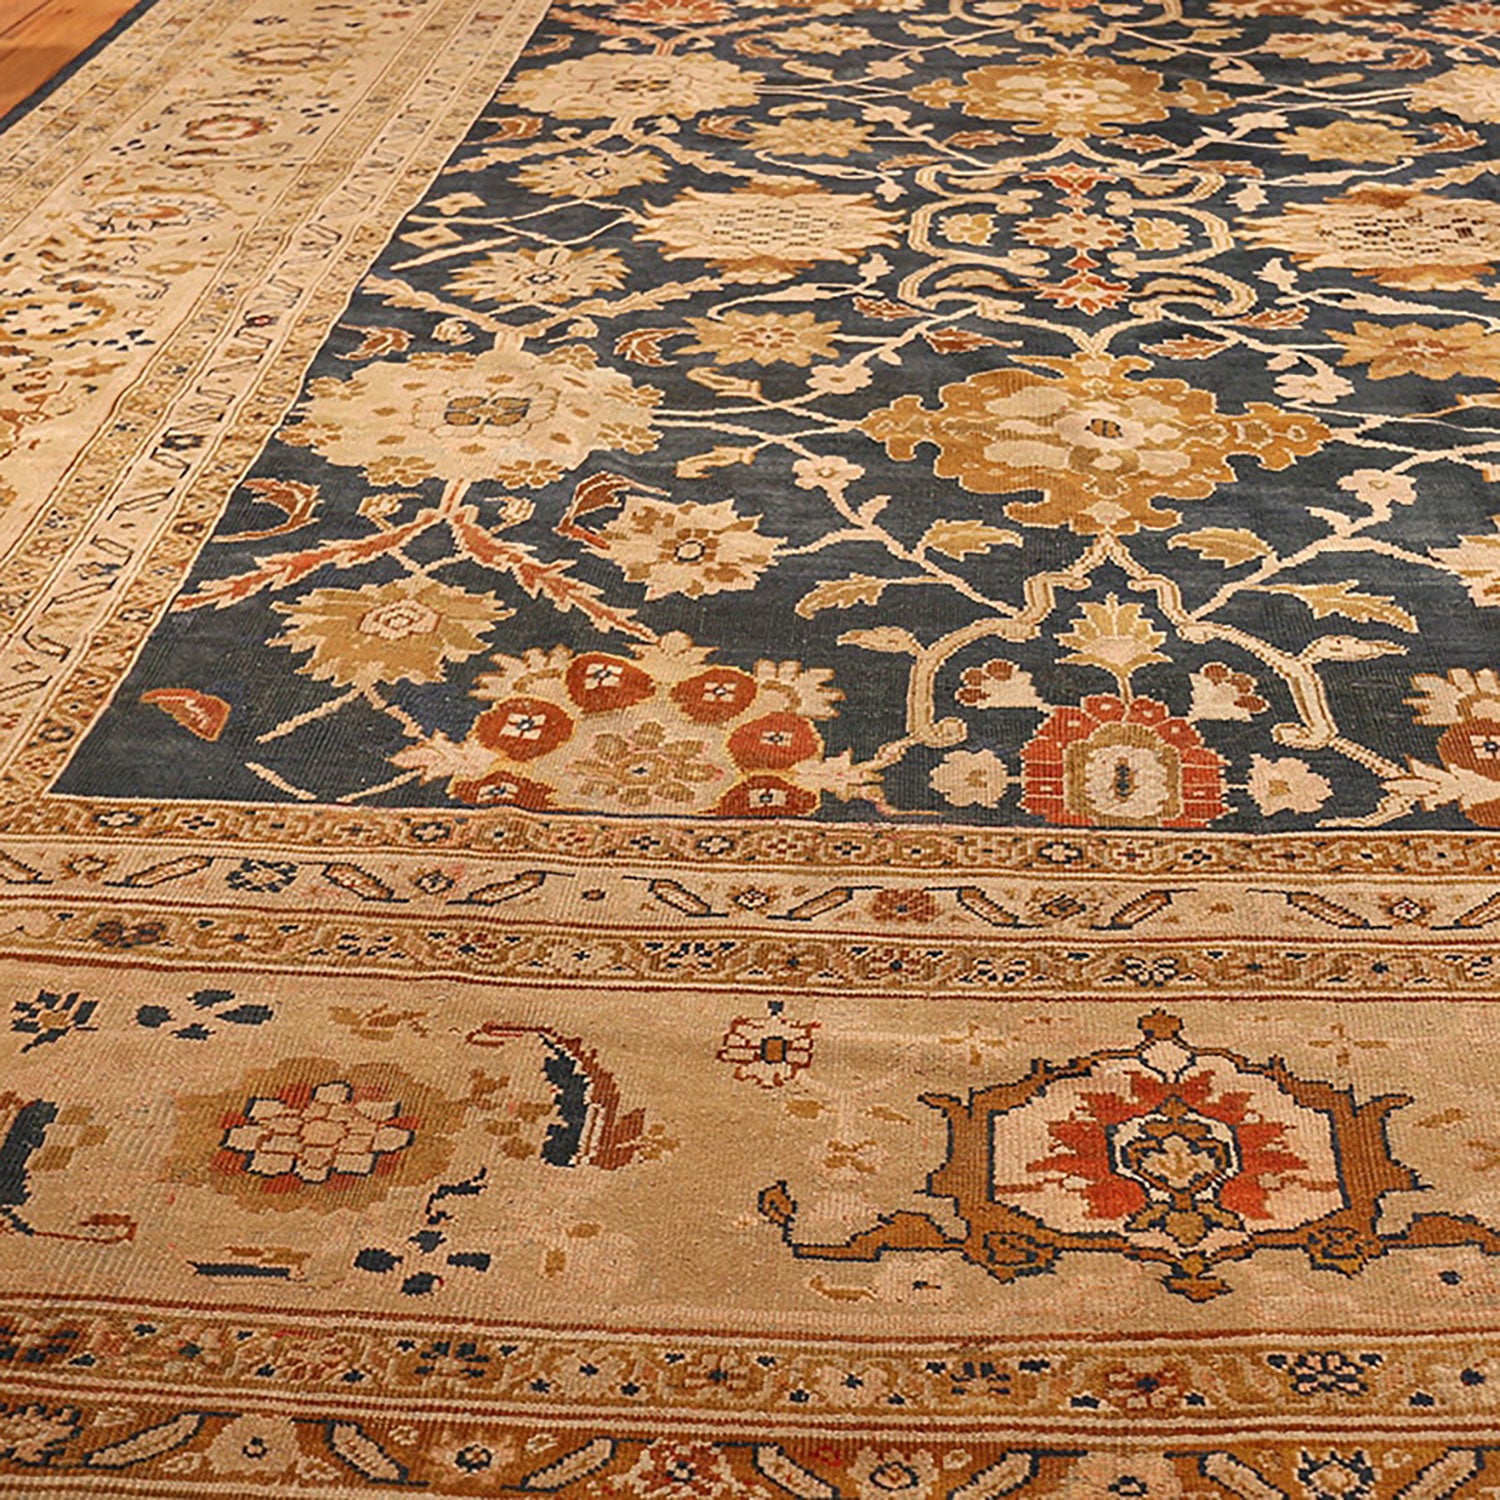 Exquisite traditional oriental rug with intricate designs in fine craftsmanship.